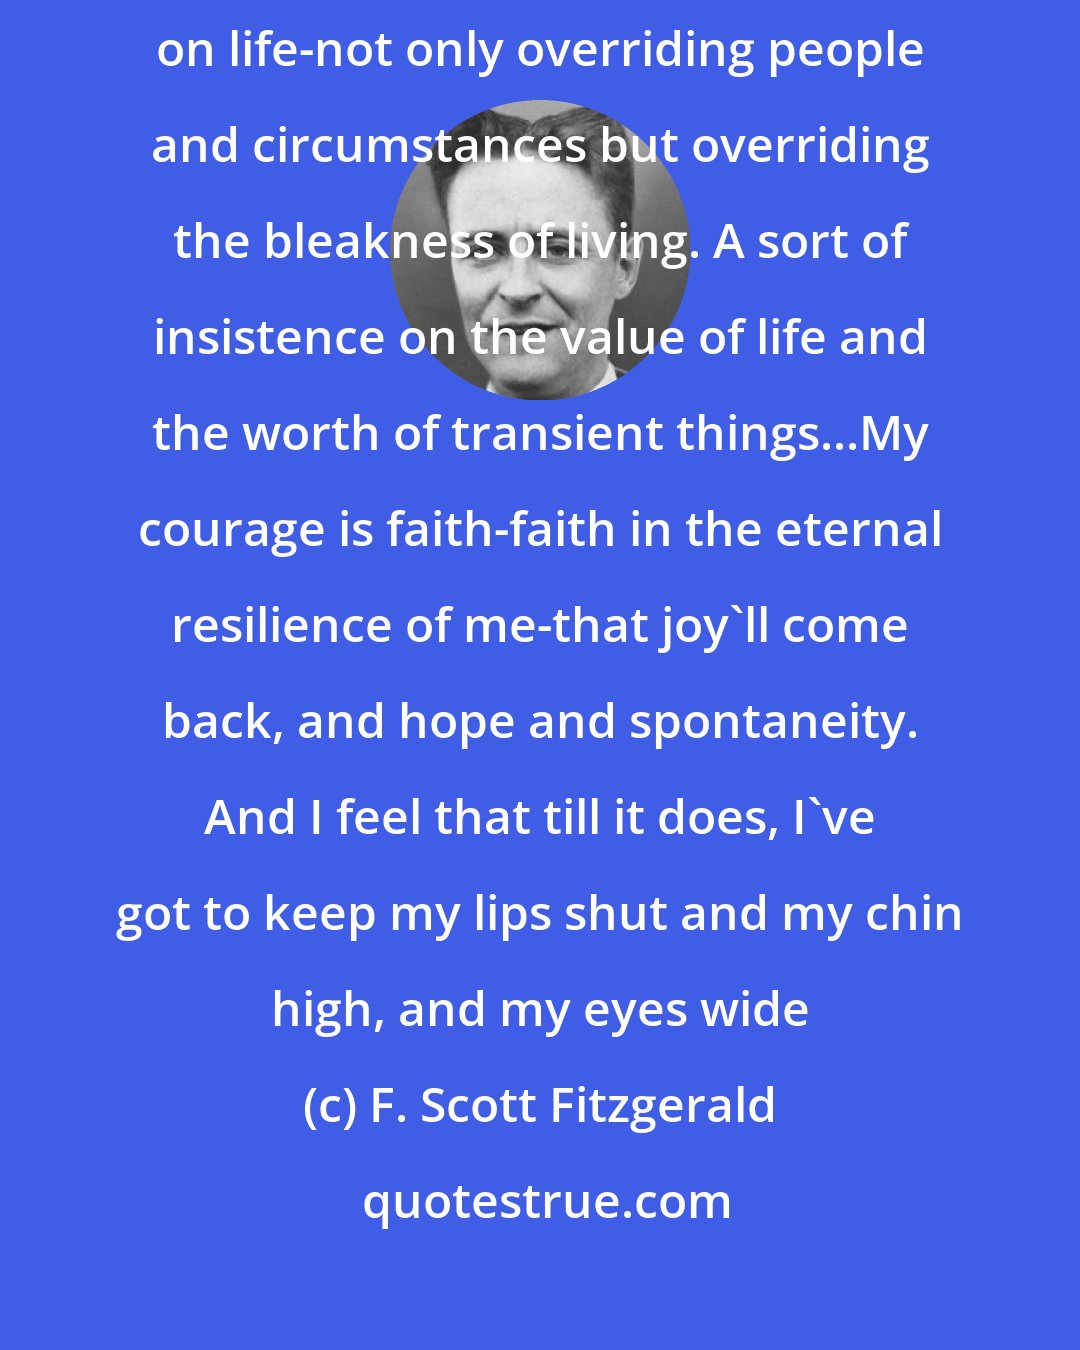 F. Scott Fitzgerald: Courage to me means ploughing through that dull gray mist that comes down on life-not only overriding people and circumstances but overriding the bleakness of living. A sort of insistence on the value of life and the worth of transient things...My courage is faith-faith in the eternal resilience of me-that joy'll come back, and hope and spontaneity. And I feel that till it does, I've got to keep my lips shut and my chin high, and my eyes wide